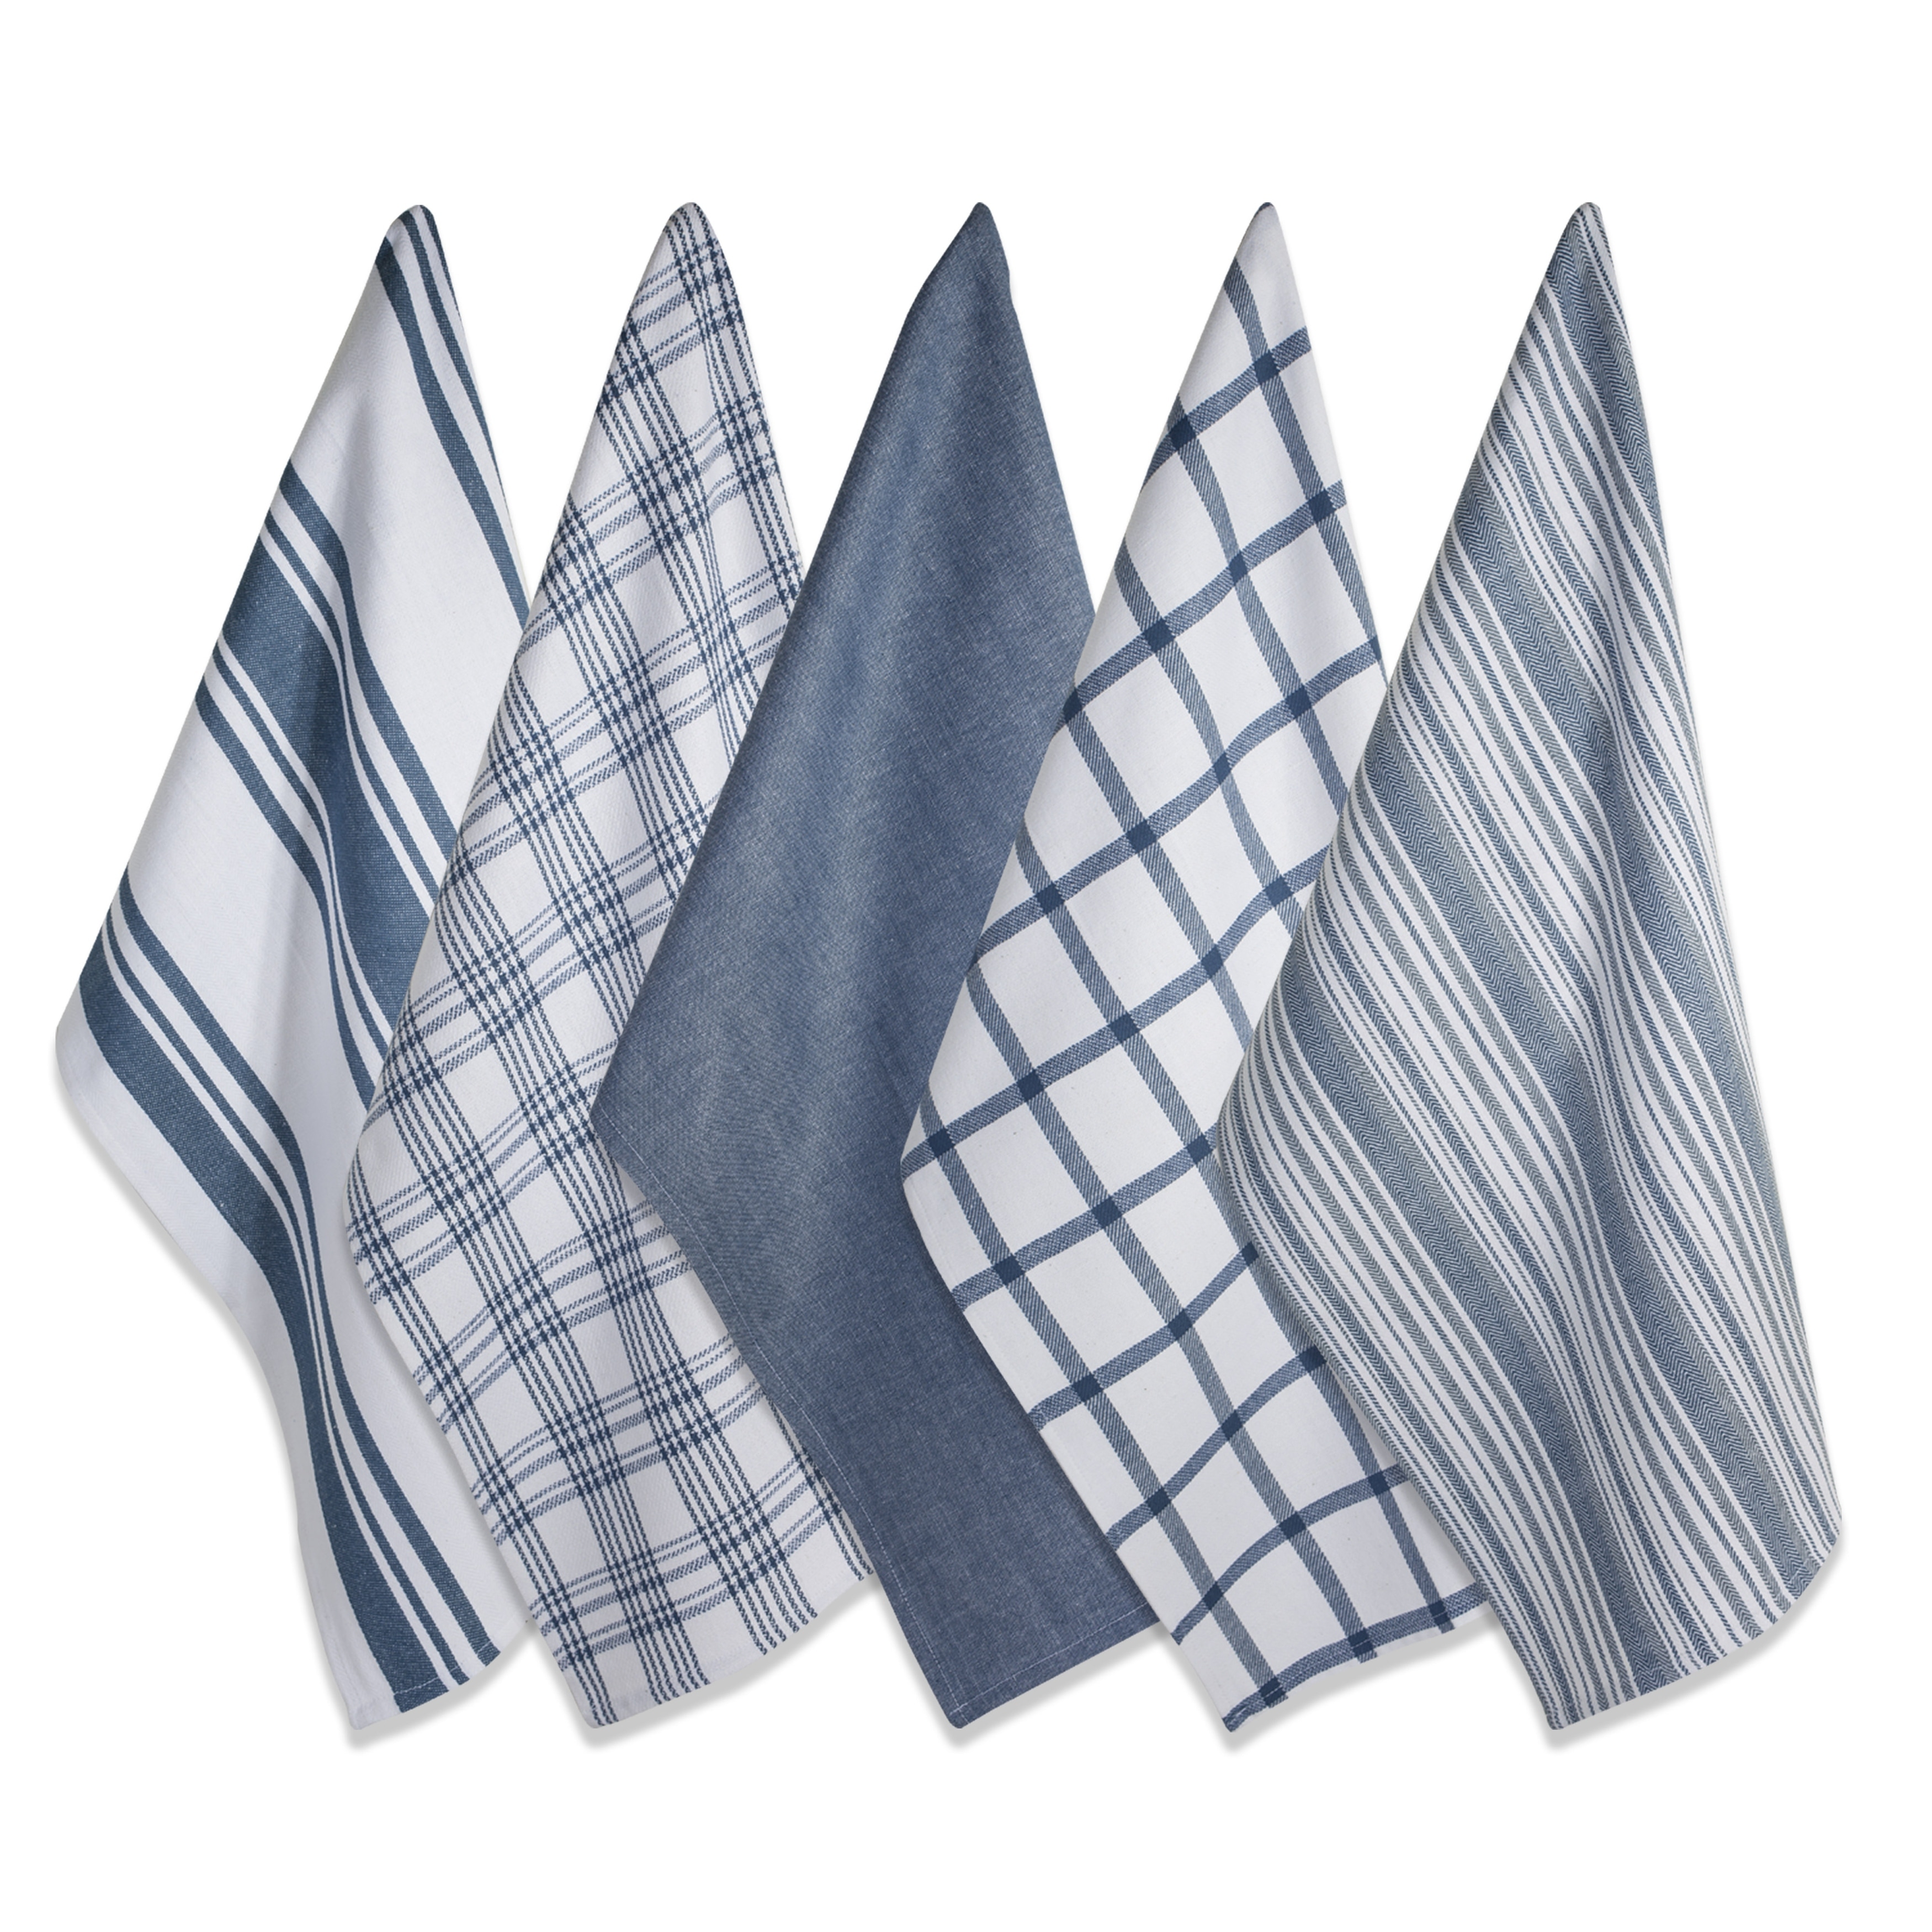 https://ak1.ostkcdn.com/images/products/is/images/direct/80160b5a3f26d570443da26e9d942da67b744fe9/Design-Imports-Assorted-Woven-Dishtowel-Set-of-5-%2828-inches-long-x-18-inches-wide%29.jpg